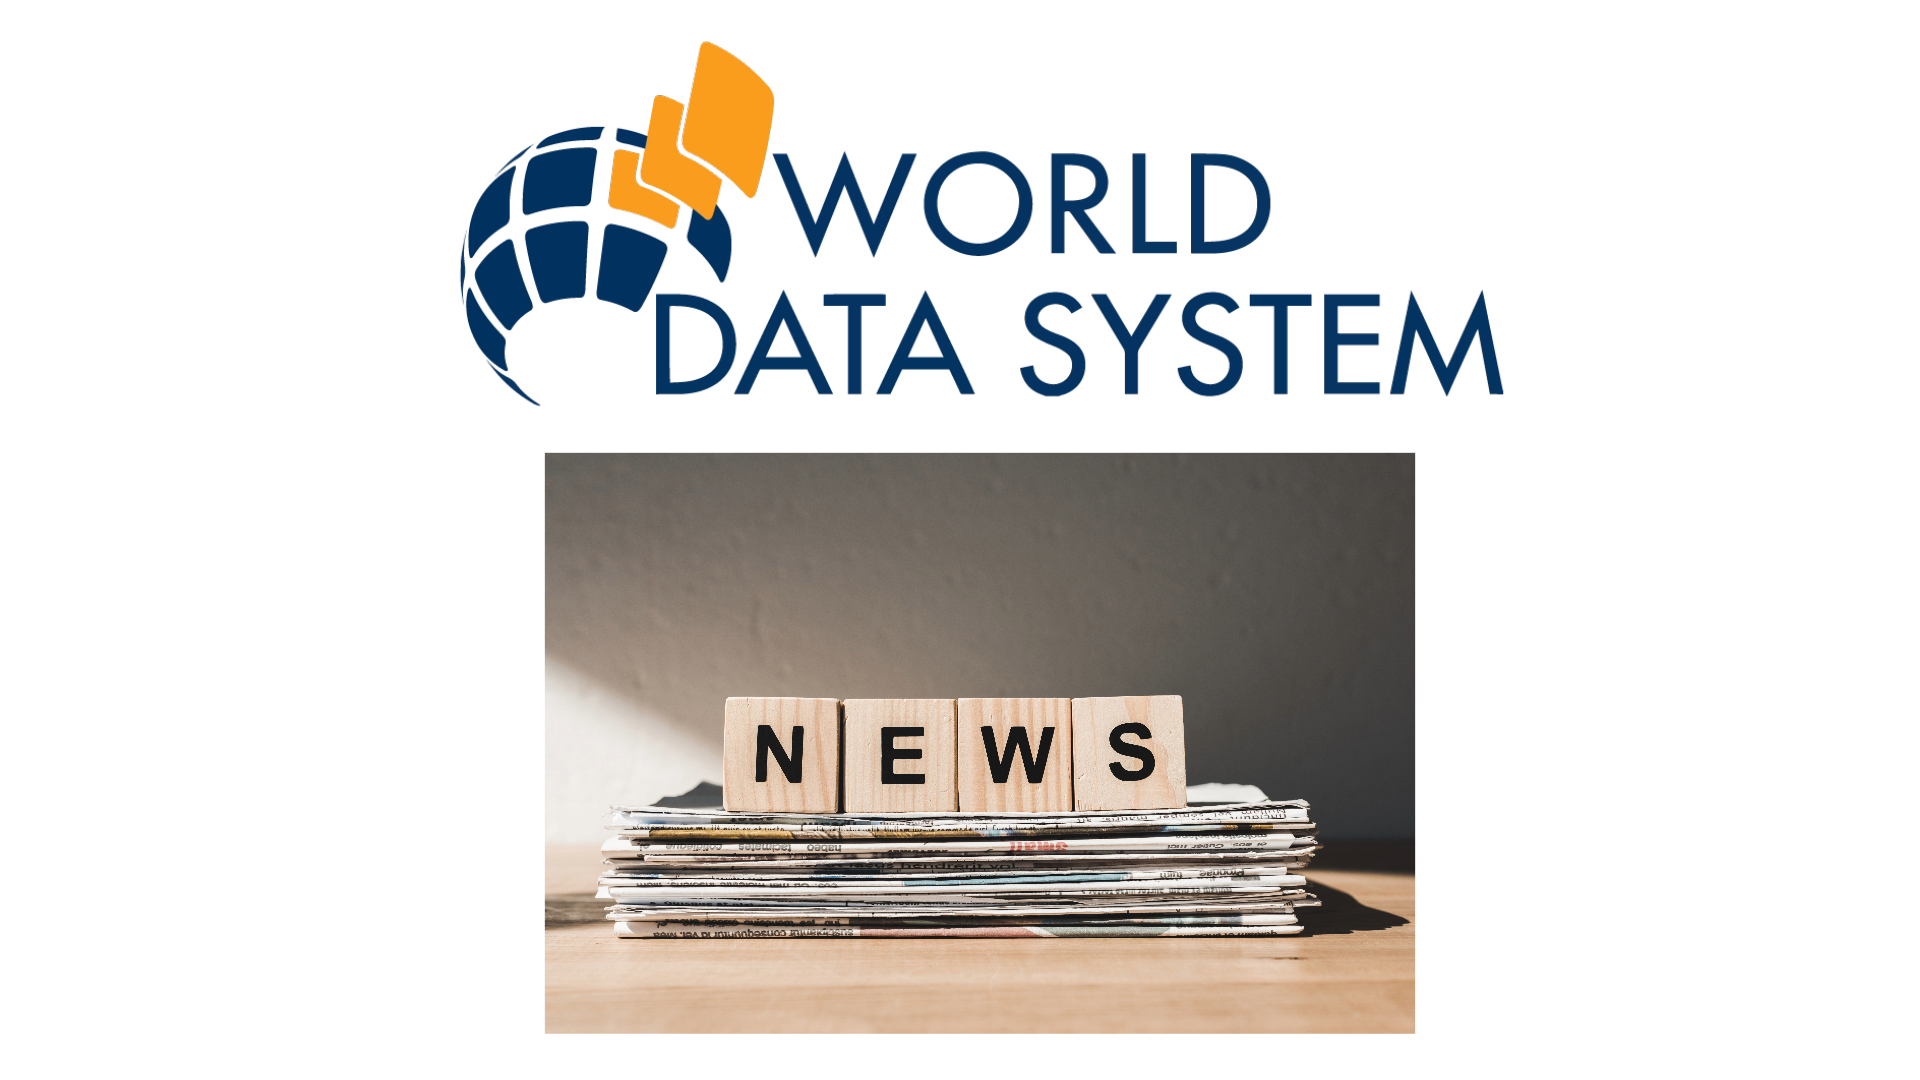 World Data System globe logo is a dark blue globe/sphere with light orange segments protruding from the globe, text reads "World Data System" above an image of a stack of newspapers with Scrabble blocks that spell "NEWS"